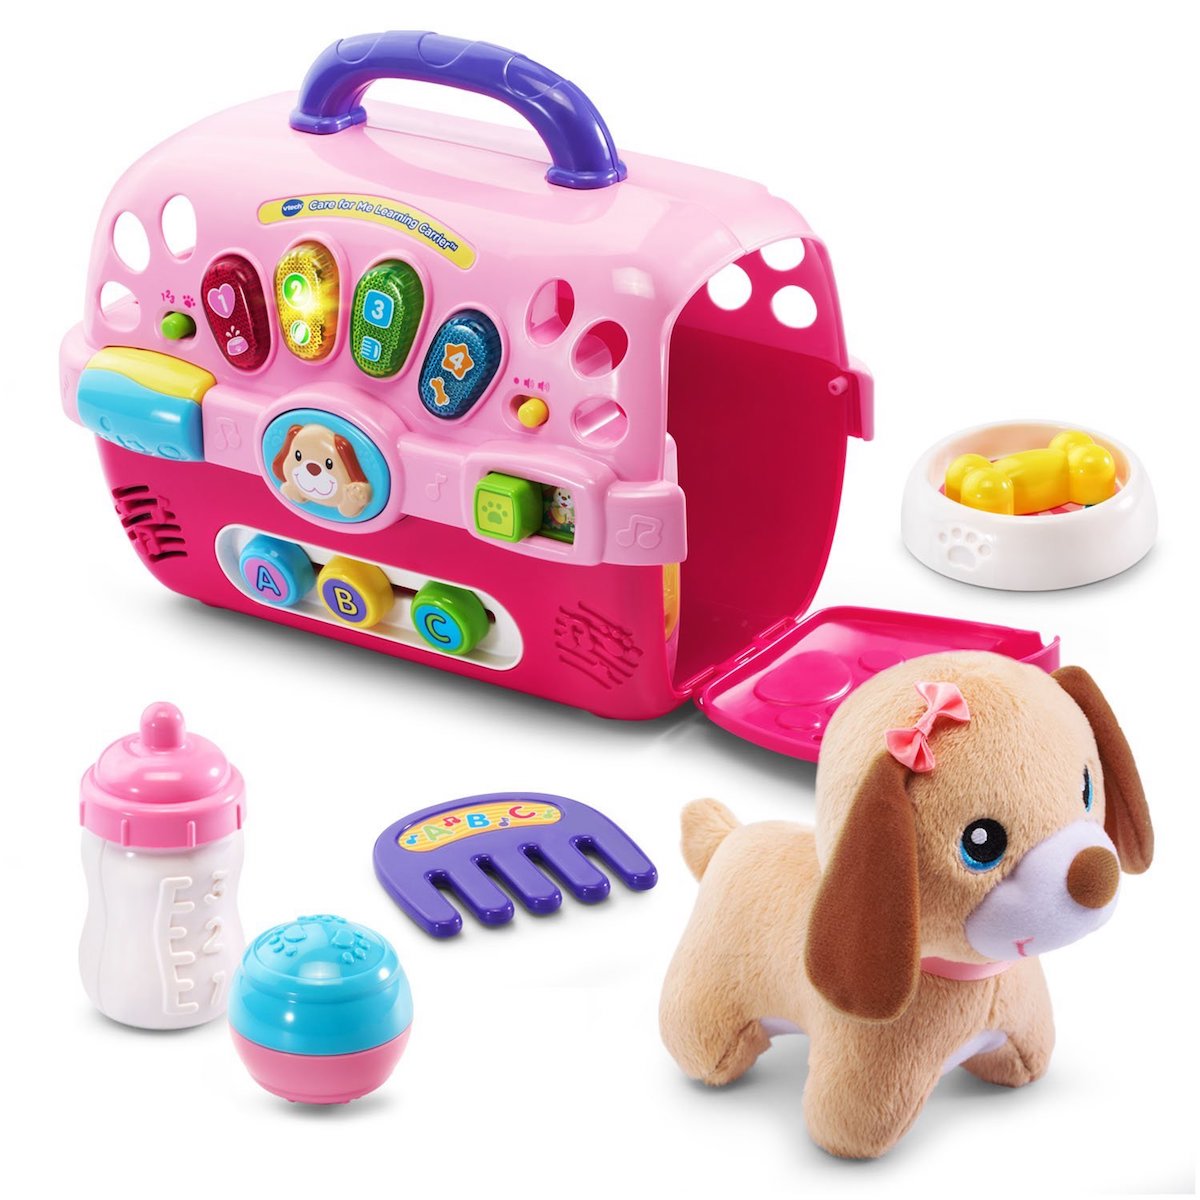 toys for 4 year old baby girl